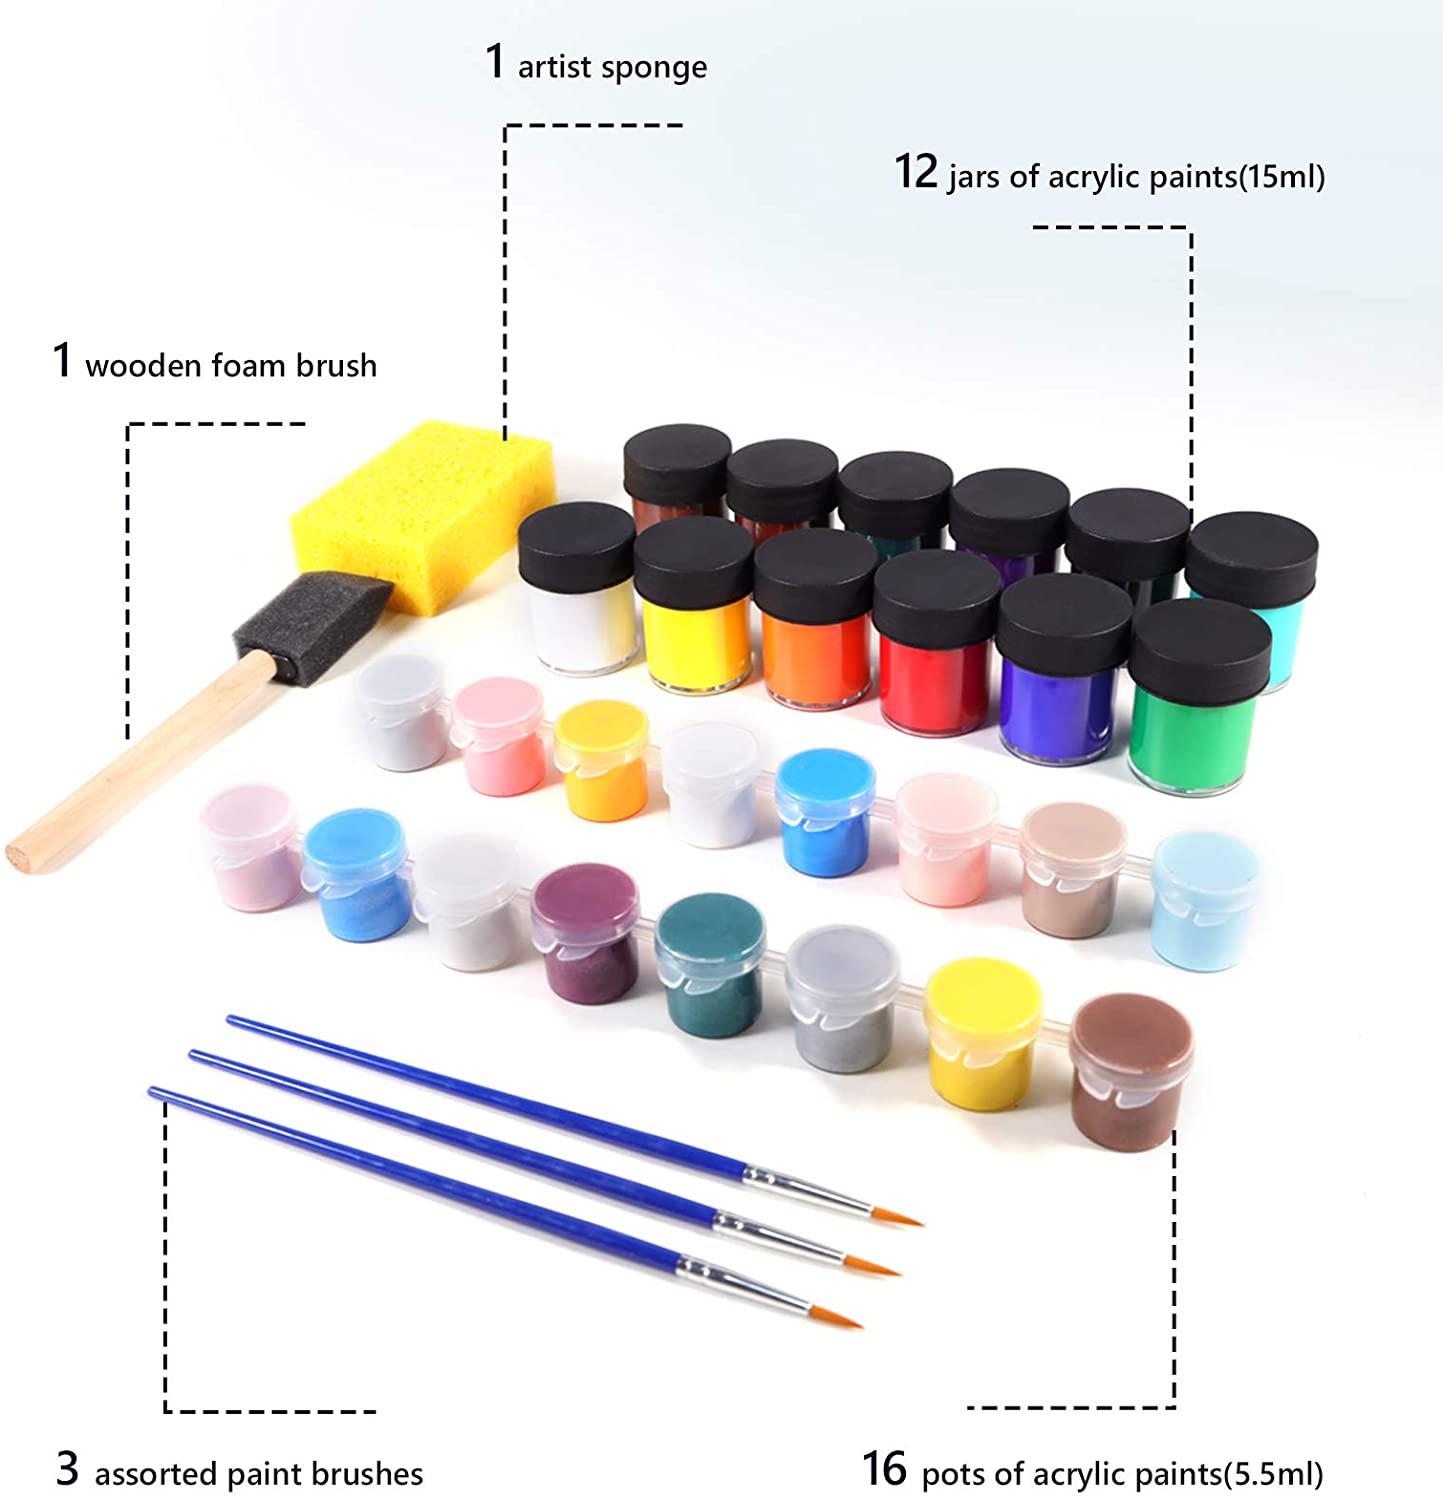 Watercolor Palette Paint Case - Large Metal Watercolor Tin with 28pcs Clear Full